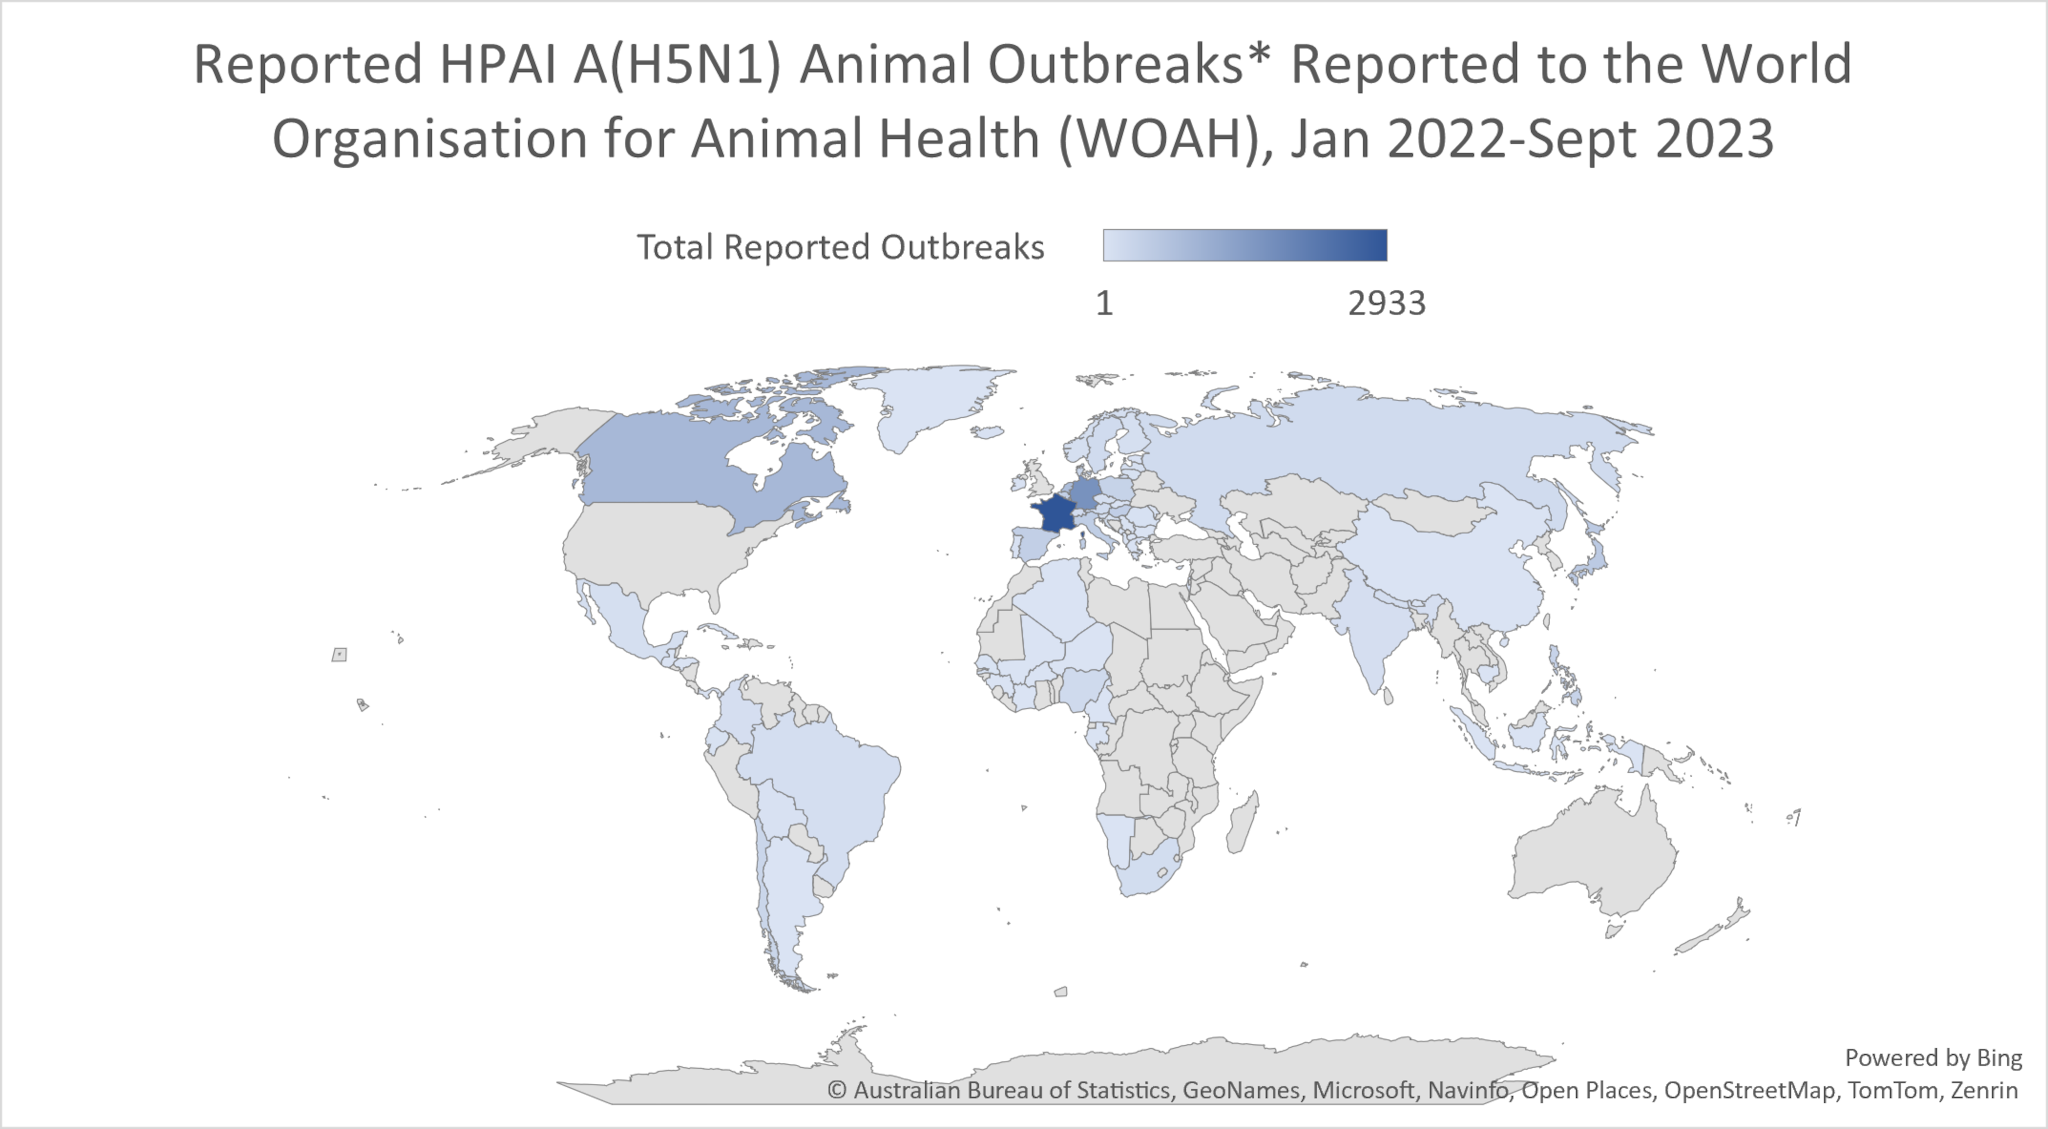 Reported HPAI A(H5N1) Animal Outbreaks to the World Organization for Animal Health (WHOAH), Jan 2022-Sept 2023